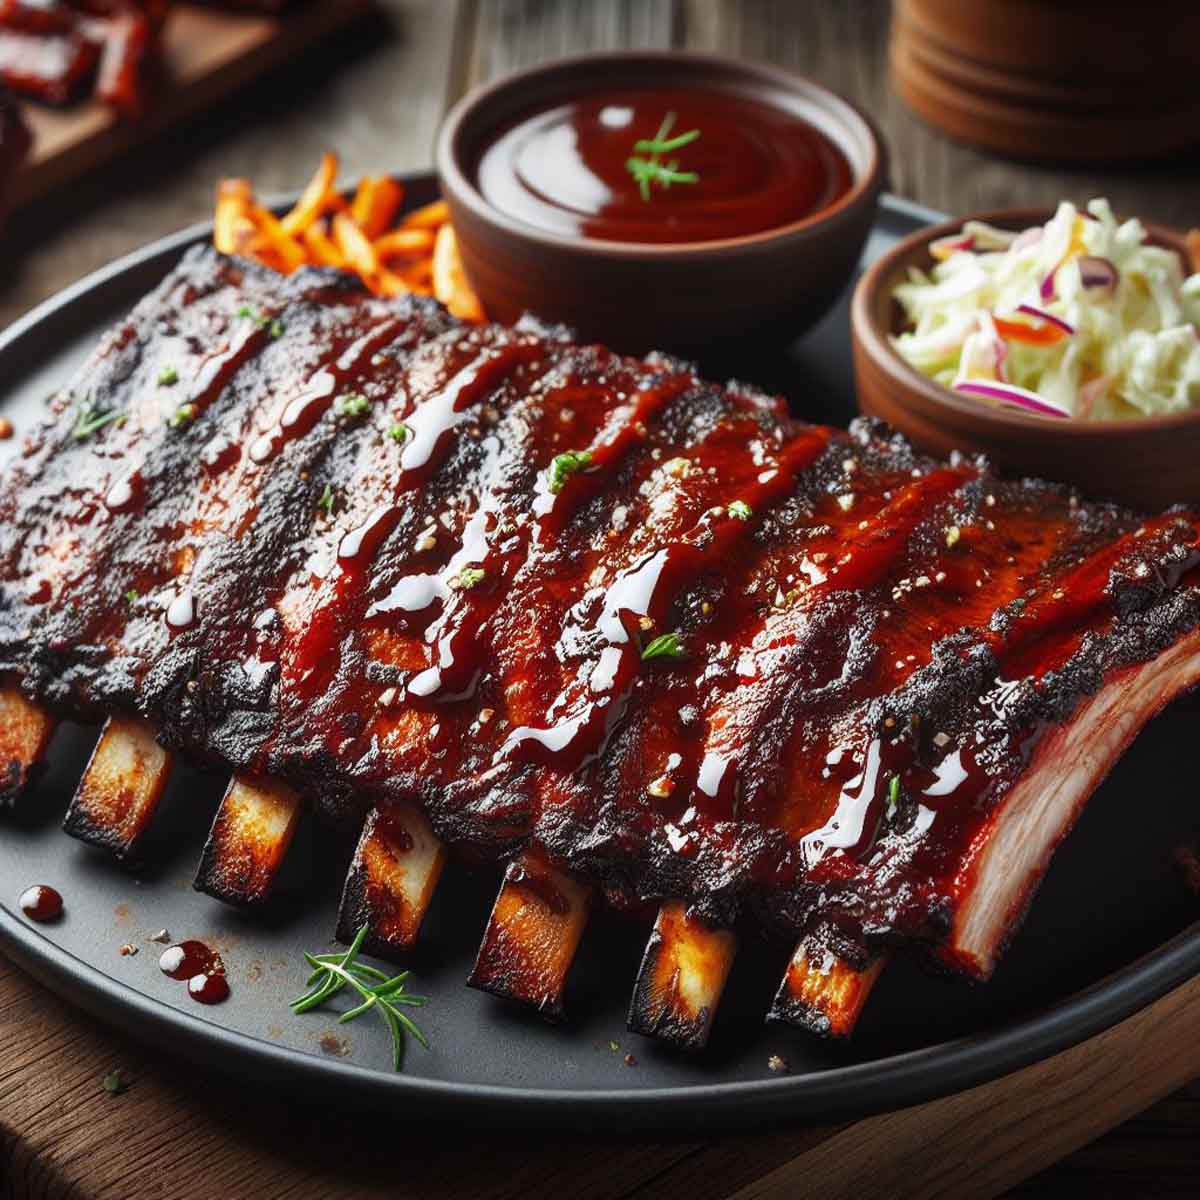 Cooked St. Louis style ribs on a platter, glazed with a rich, caramelized barbecue sauce.